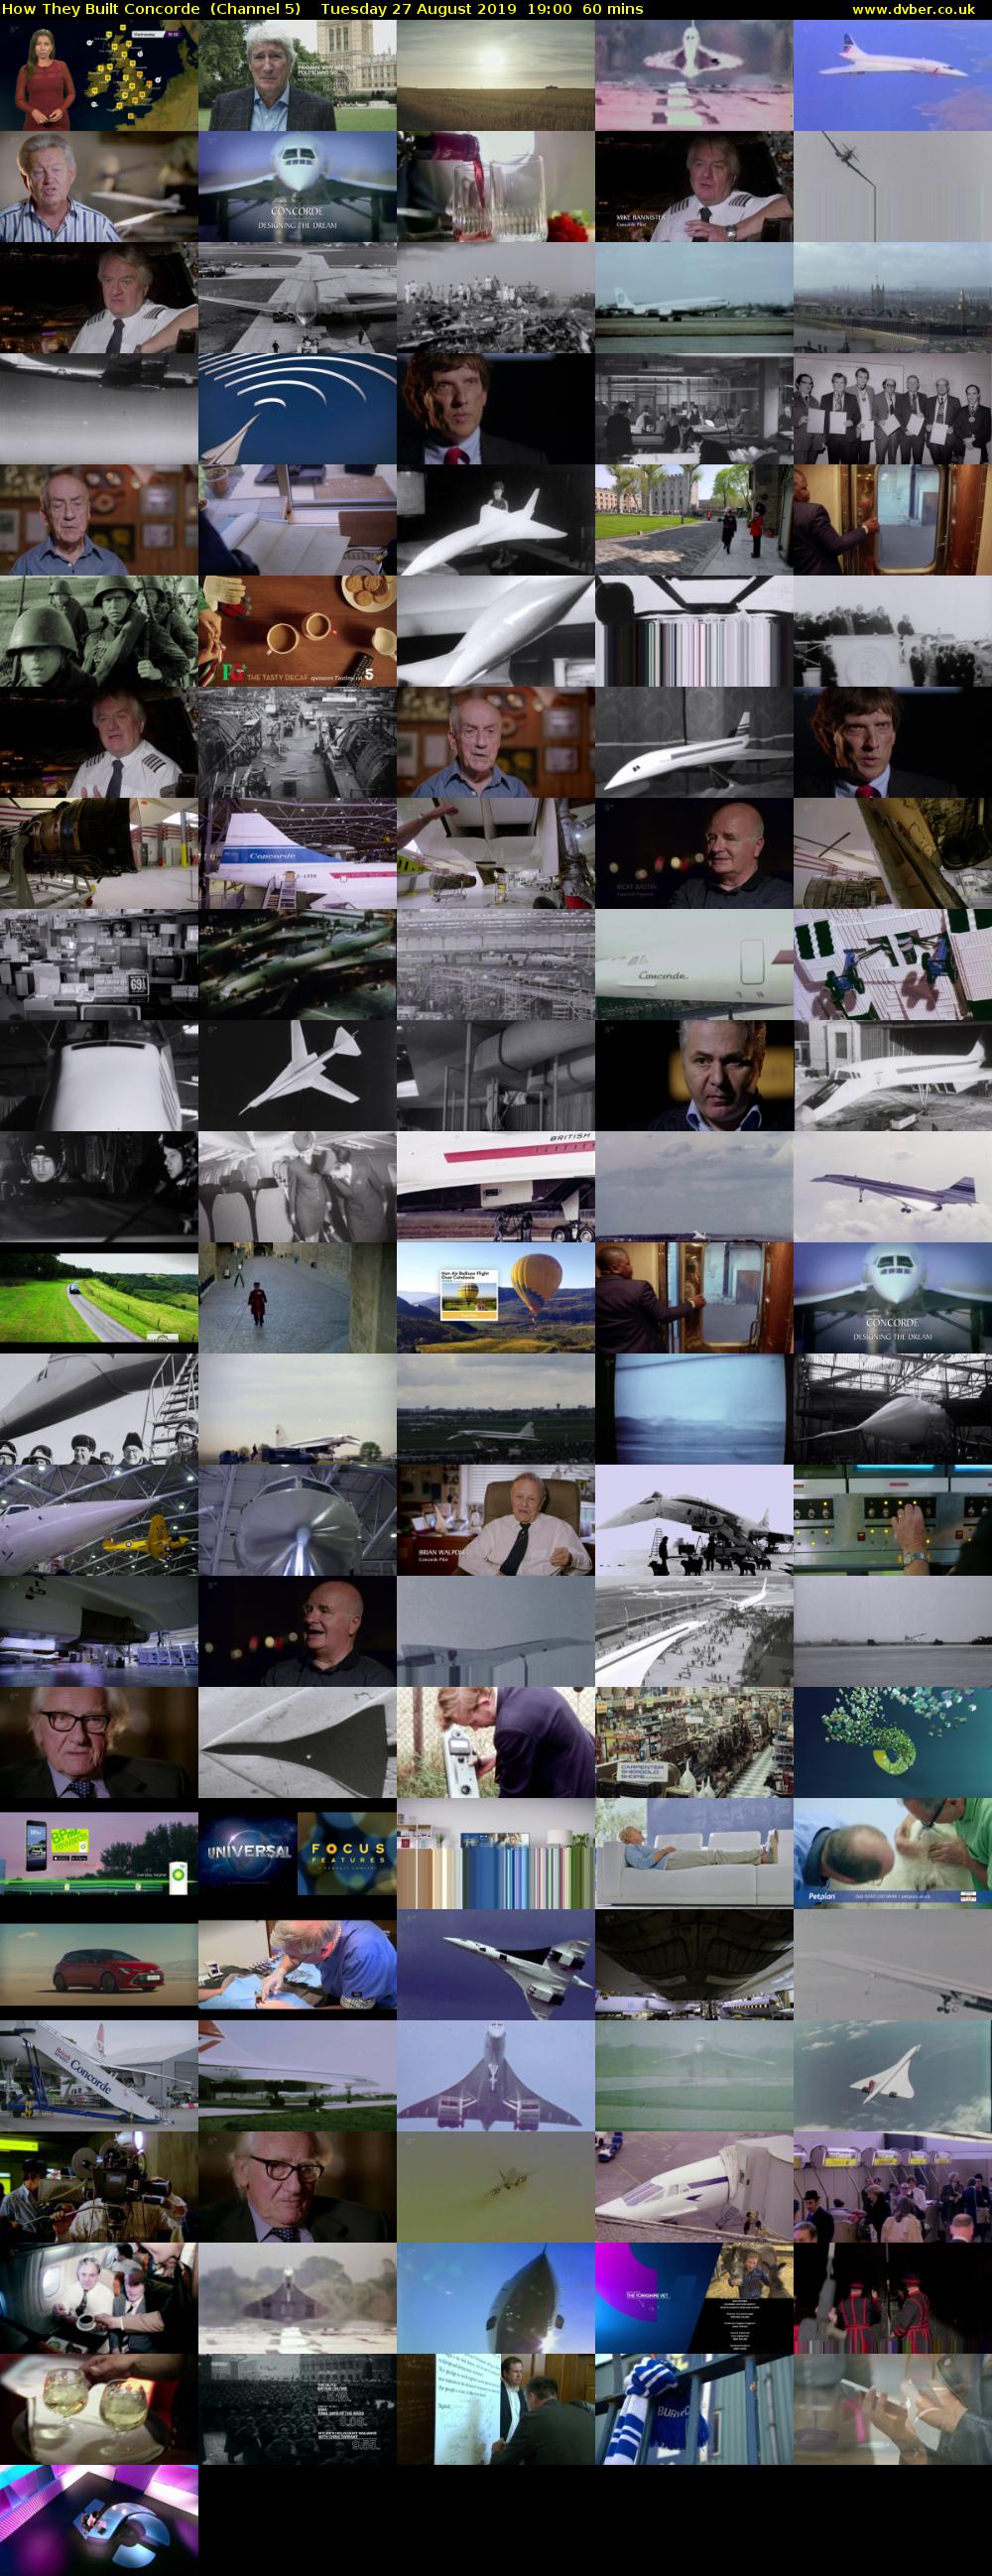 How They Built Concorde  (Channel 5) Tuesday 27 August 2019 19:00 - 20:00